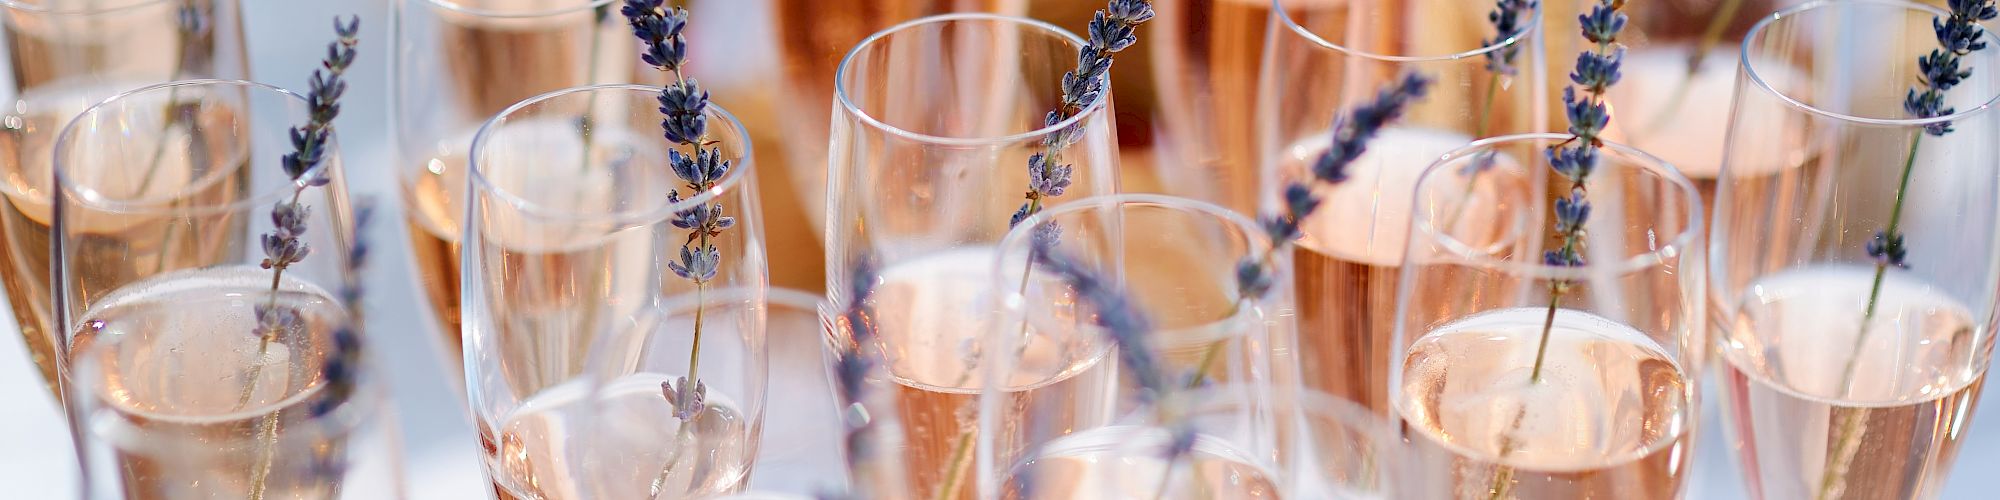 The image shows multiple glasses of rosé wine with sprigs of lavender as garnish, arranged on a table, likely for an event or celebration.